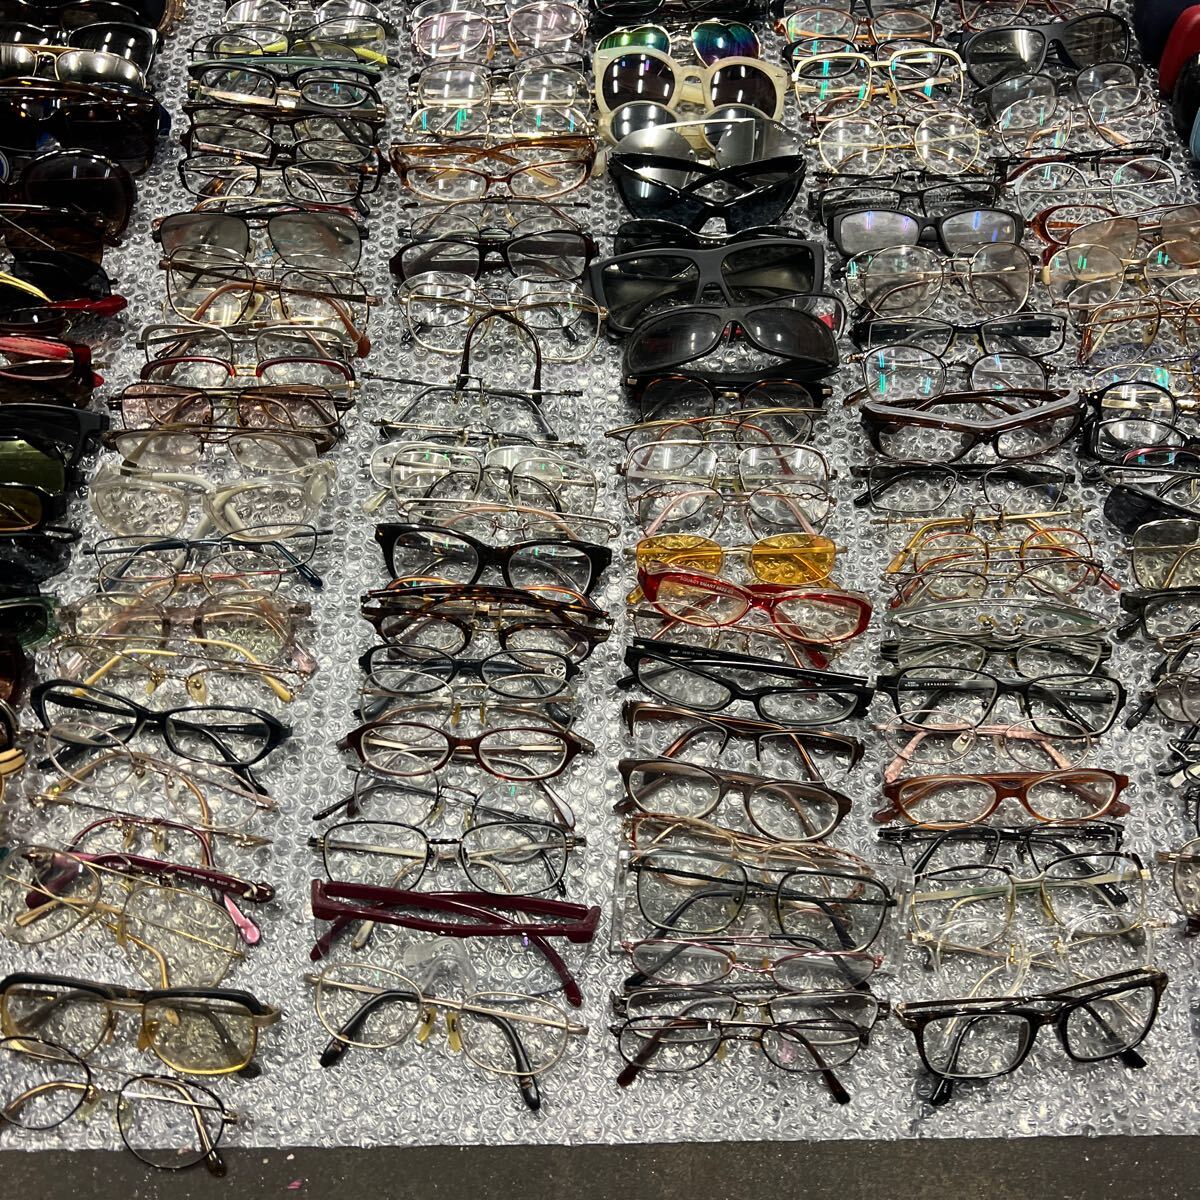  sunglasses glasses large amount approximately 400 piece and more summarize Junk 